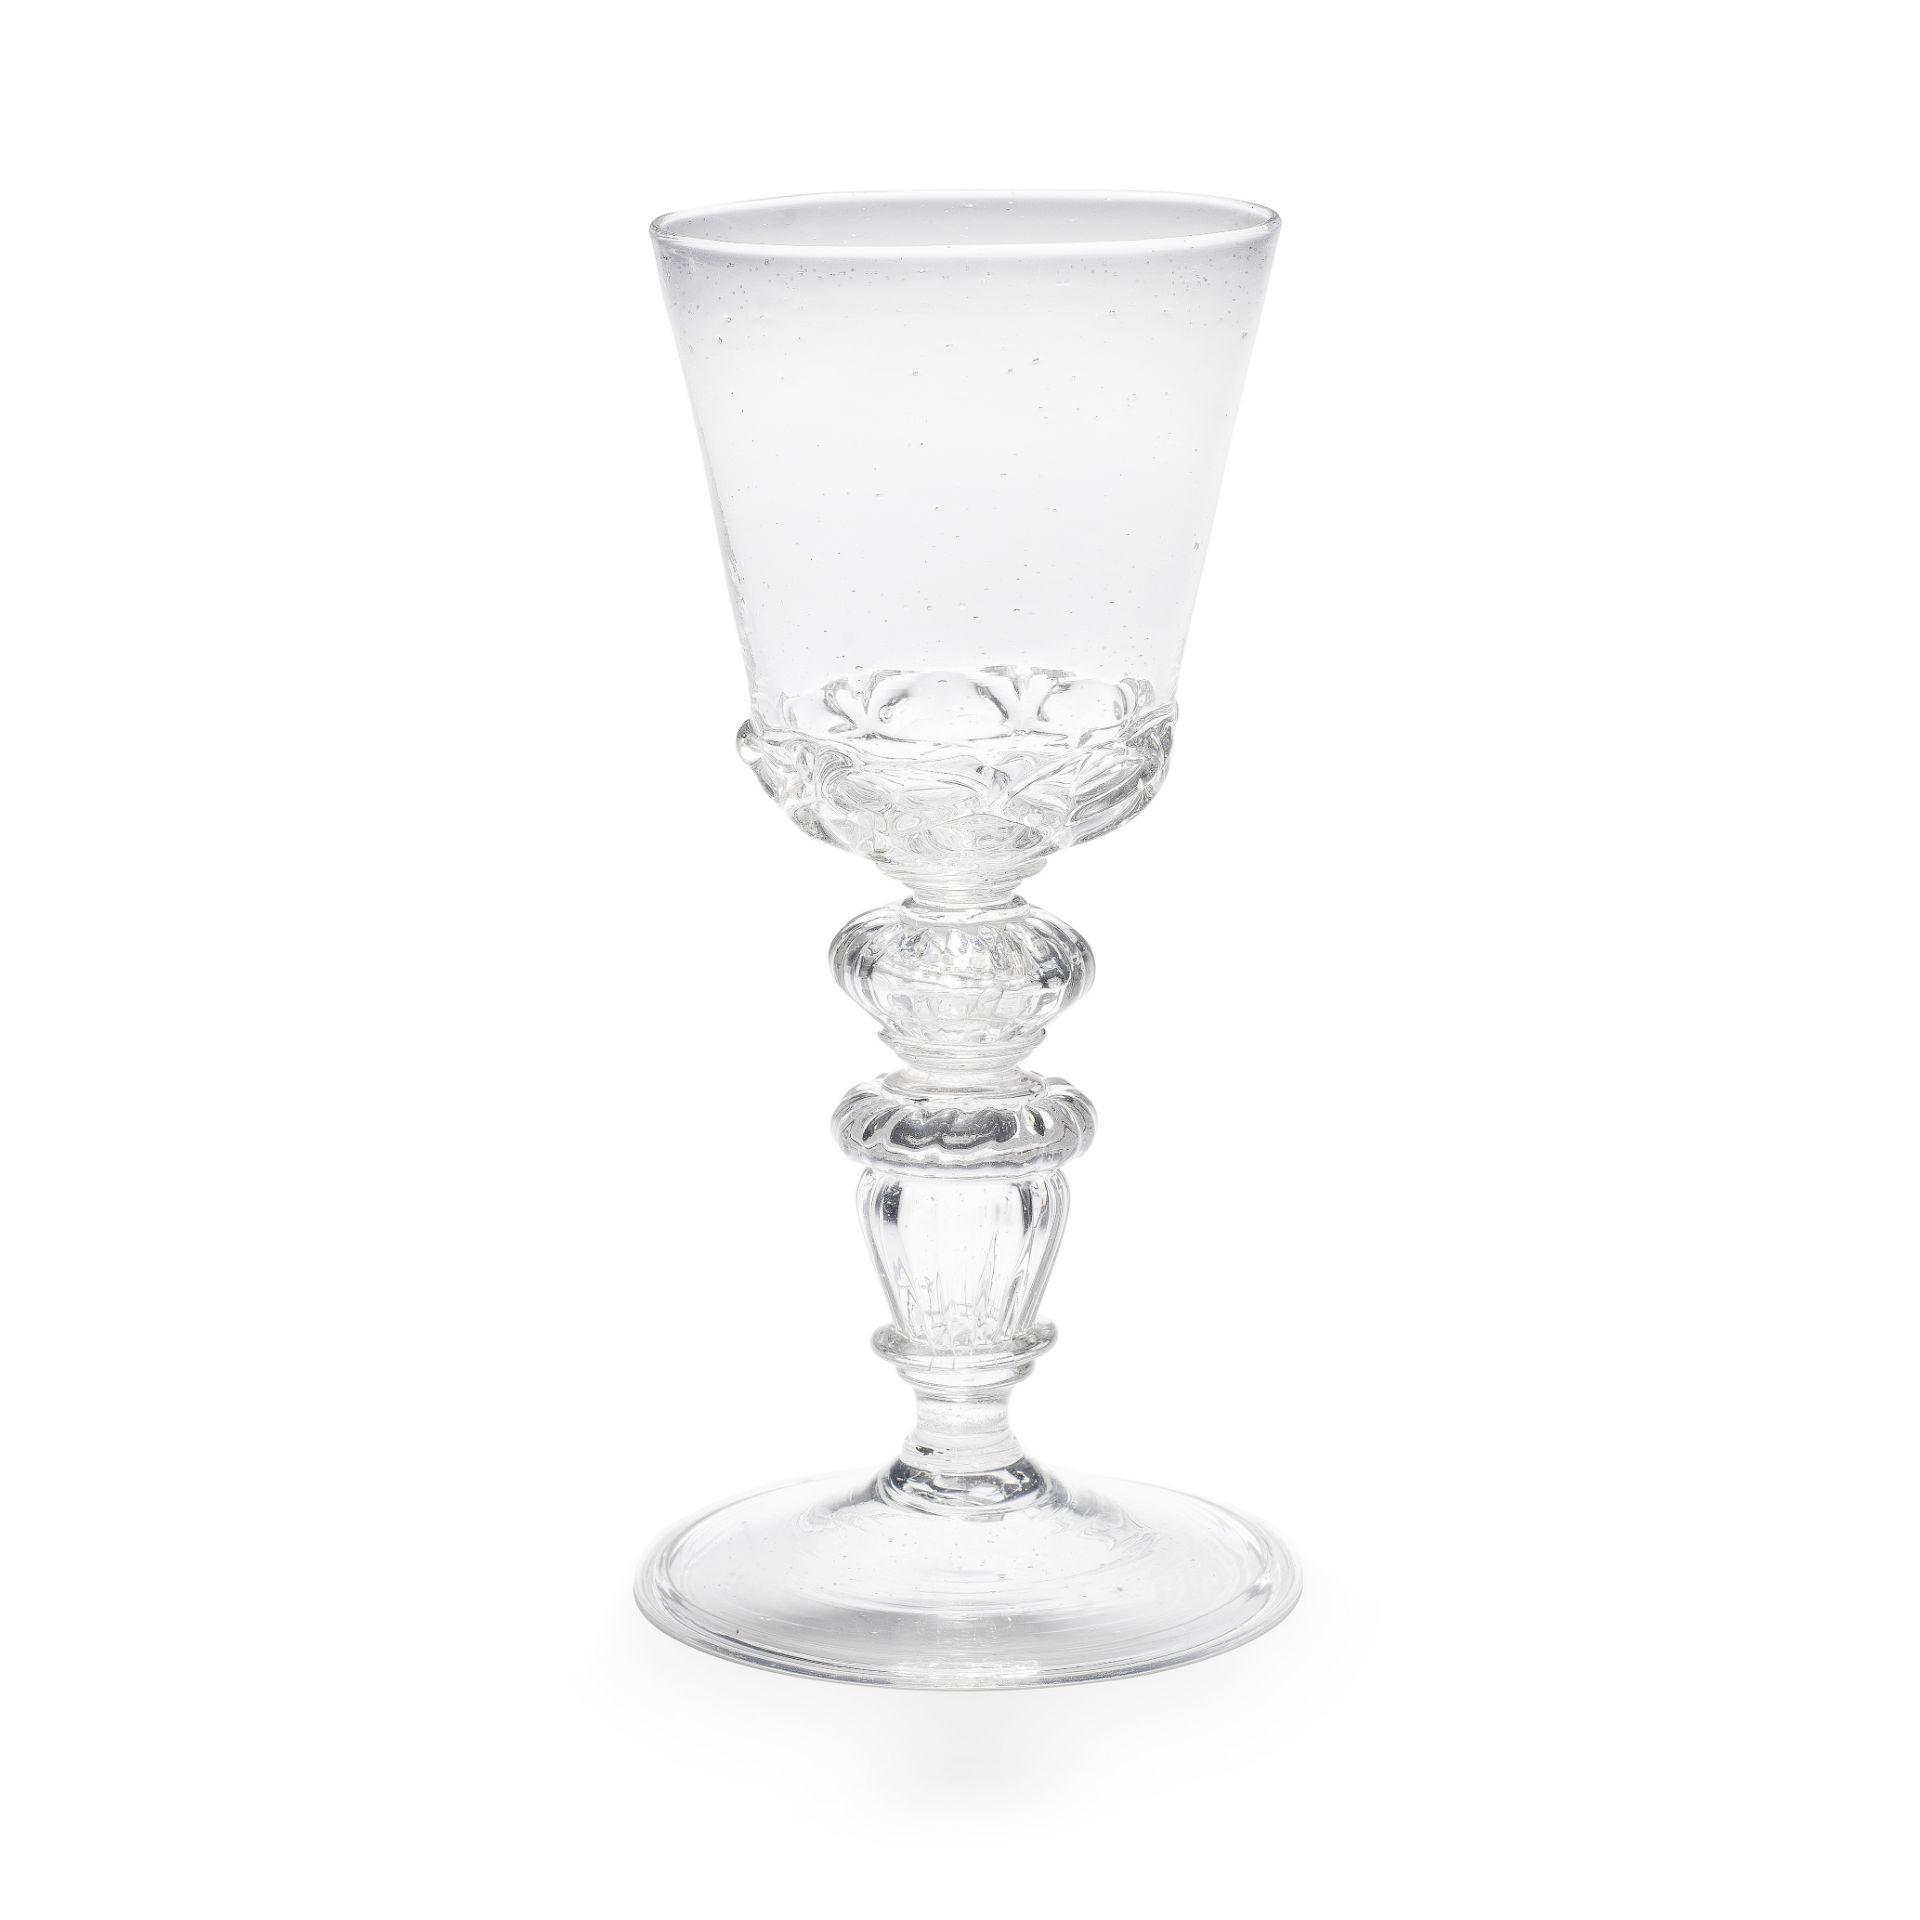 A rare and early baluster goblet, perhaps Li&#232;ge, late 17th century